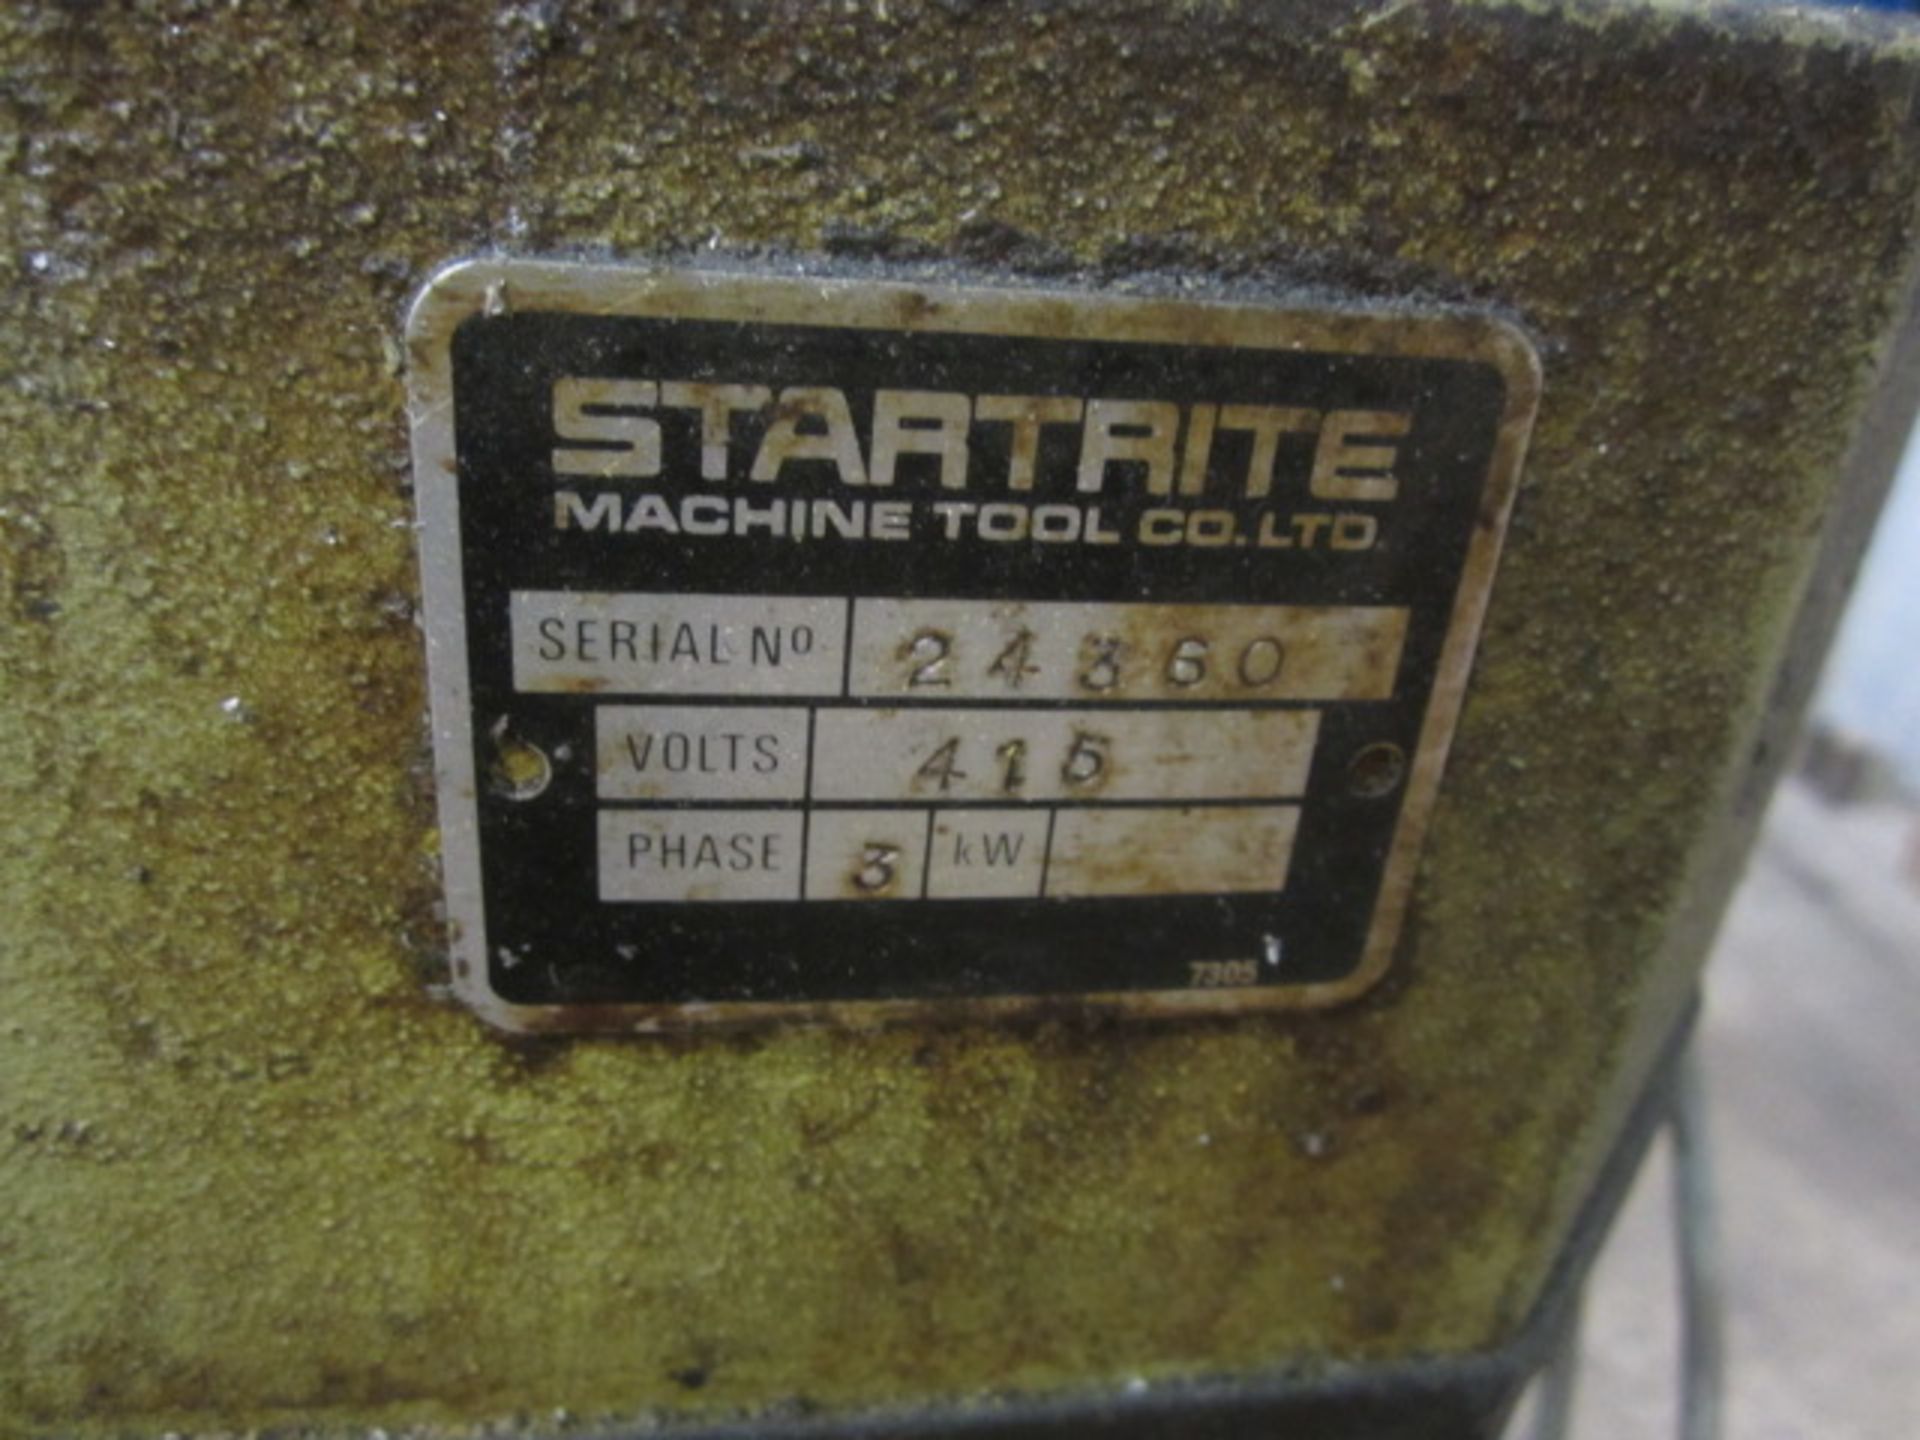 Startrite steel mitre cut off saw, serial no. 24360 (3 phase) - Image 4 of 5